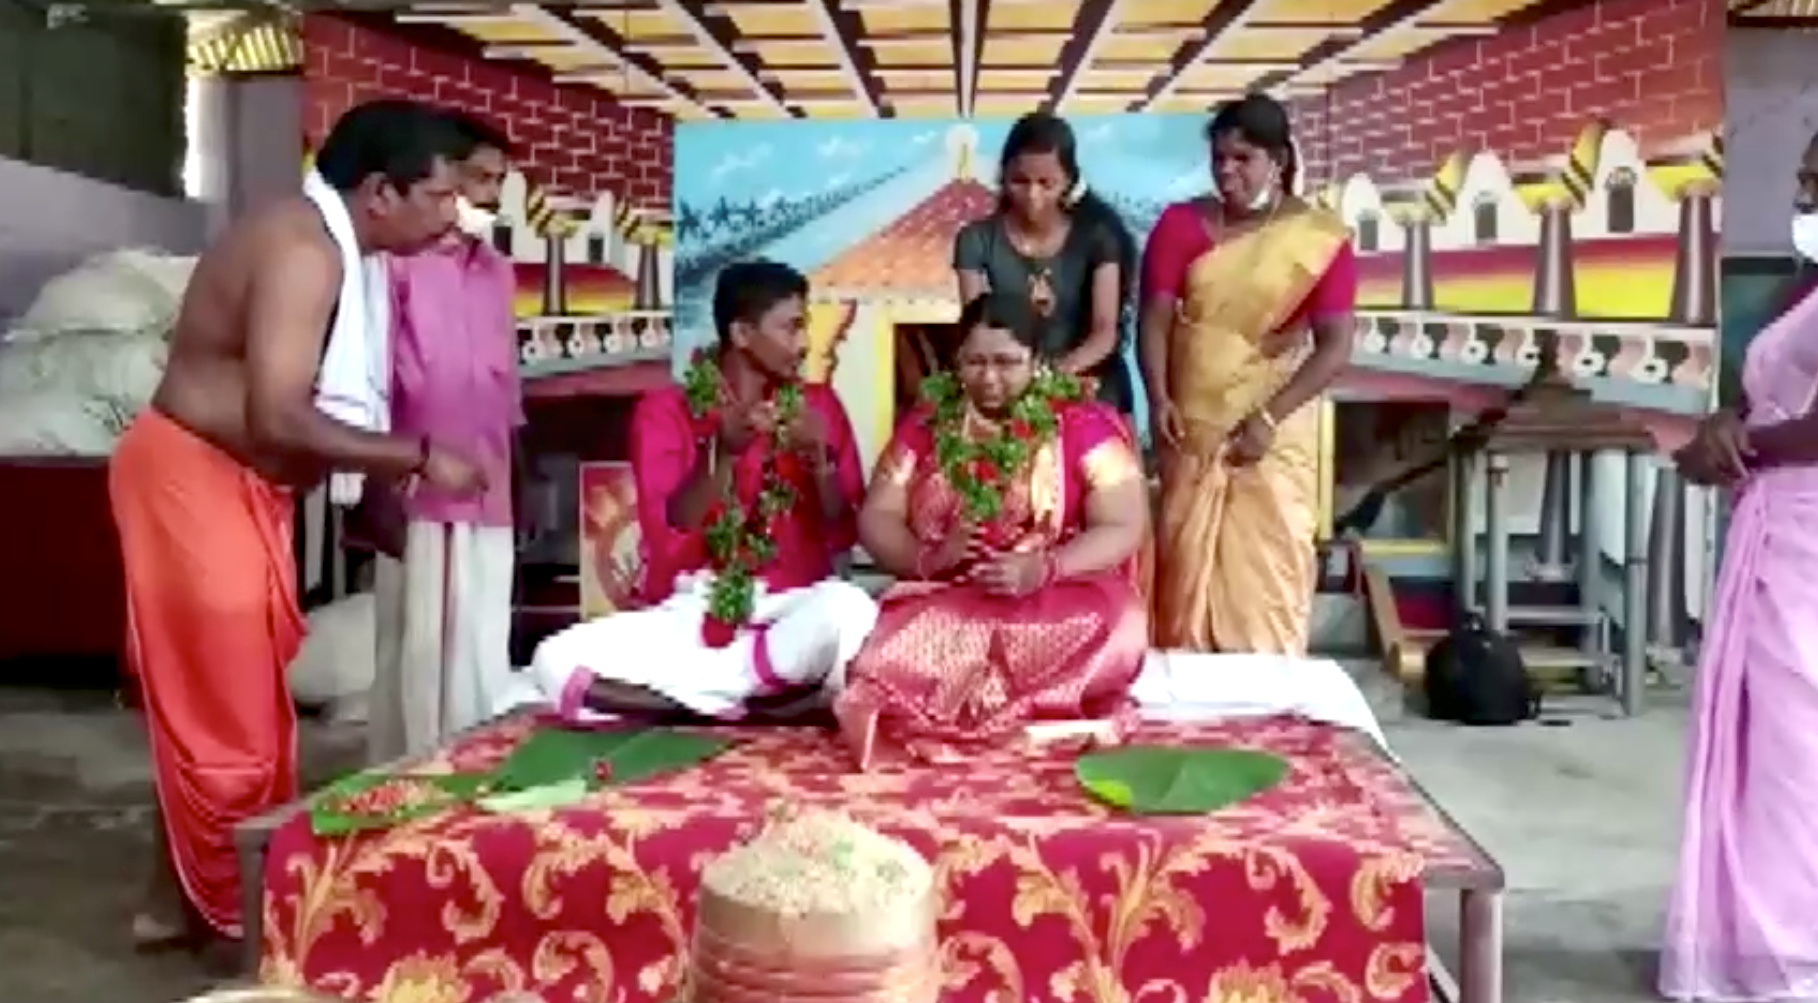 Floods force Indian couple to float to their wedding - in a cooking pot |  Reuters